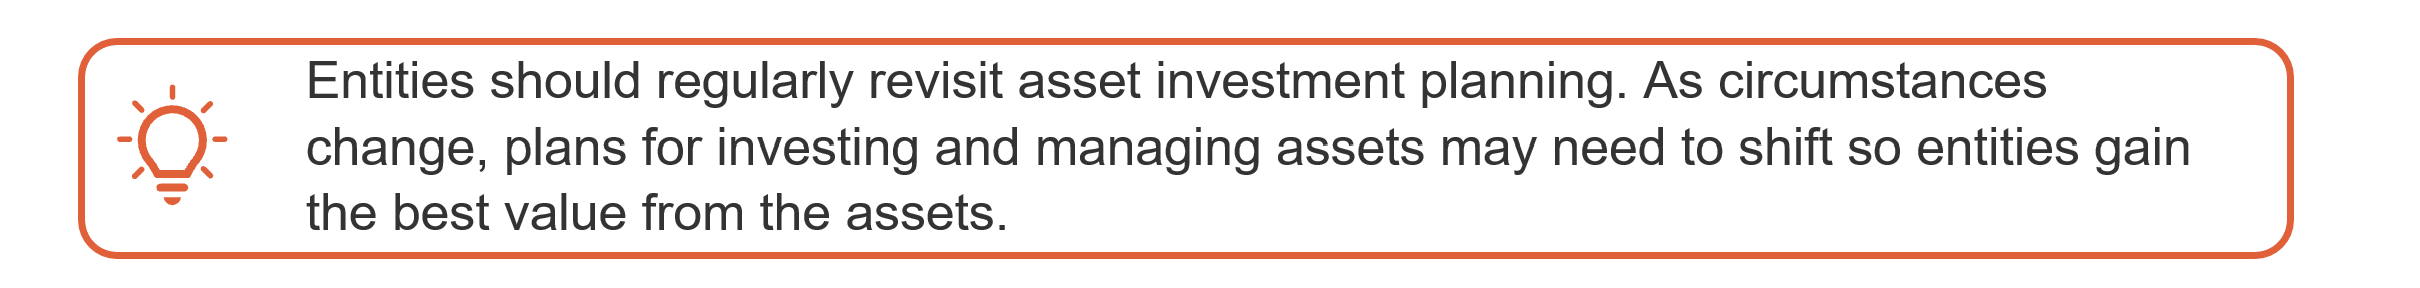 Entities should revisit asses investment planning.